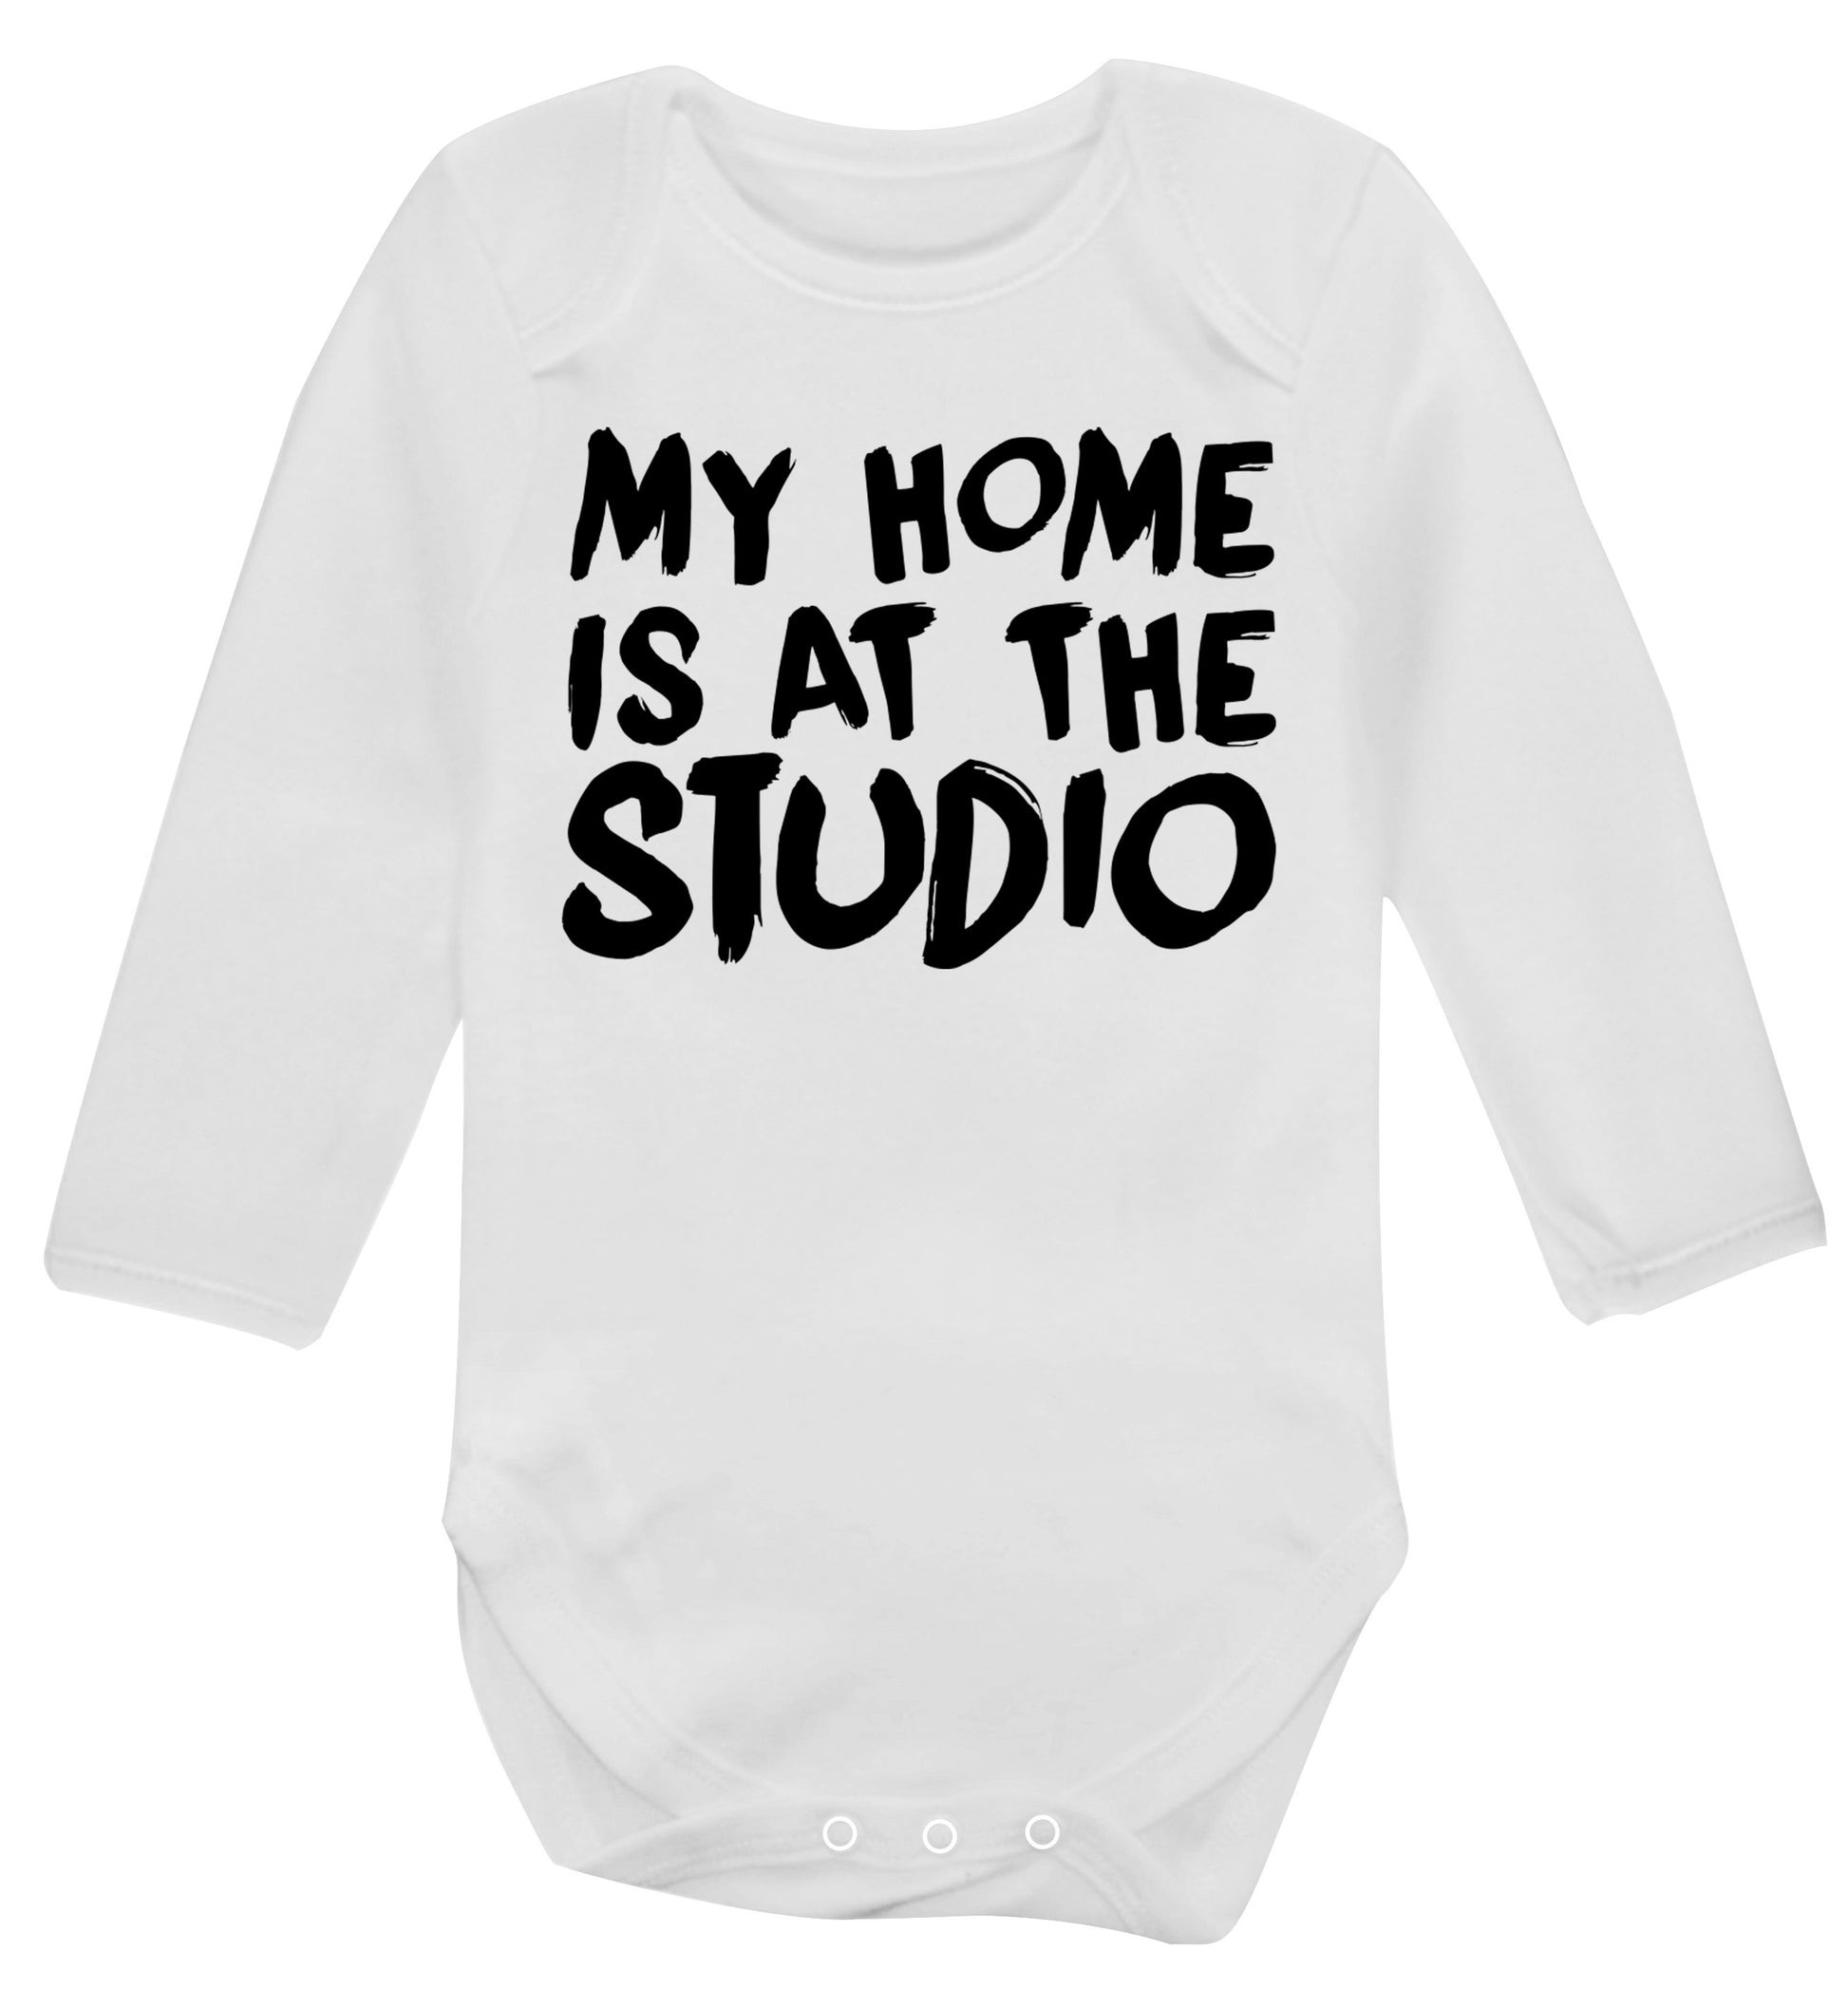 My home is at the studio Baby Vest long sleeved white 6-12 months